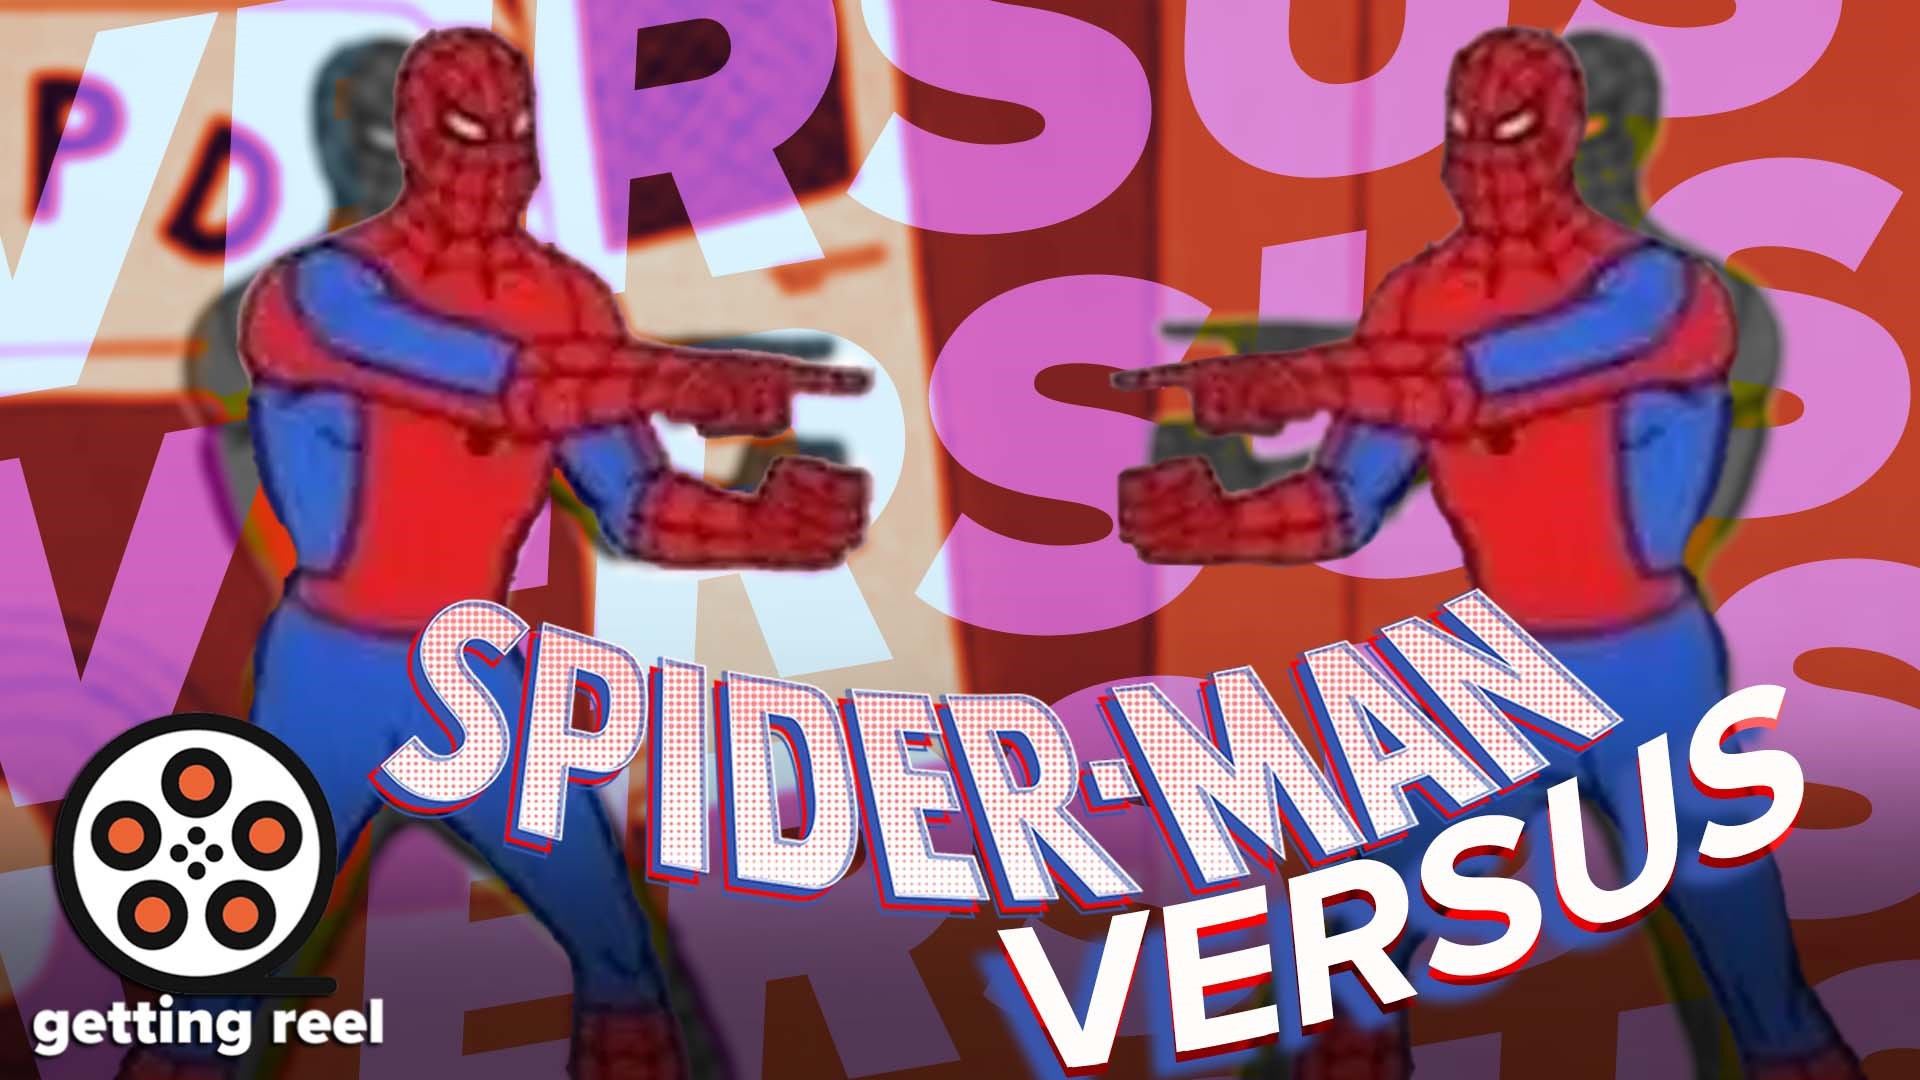 Kam joins Michael and JD to discuss who is the best Spider-Man in the films we've seen and how excited we are for the next Spider-Verse movie.